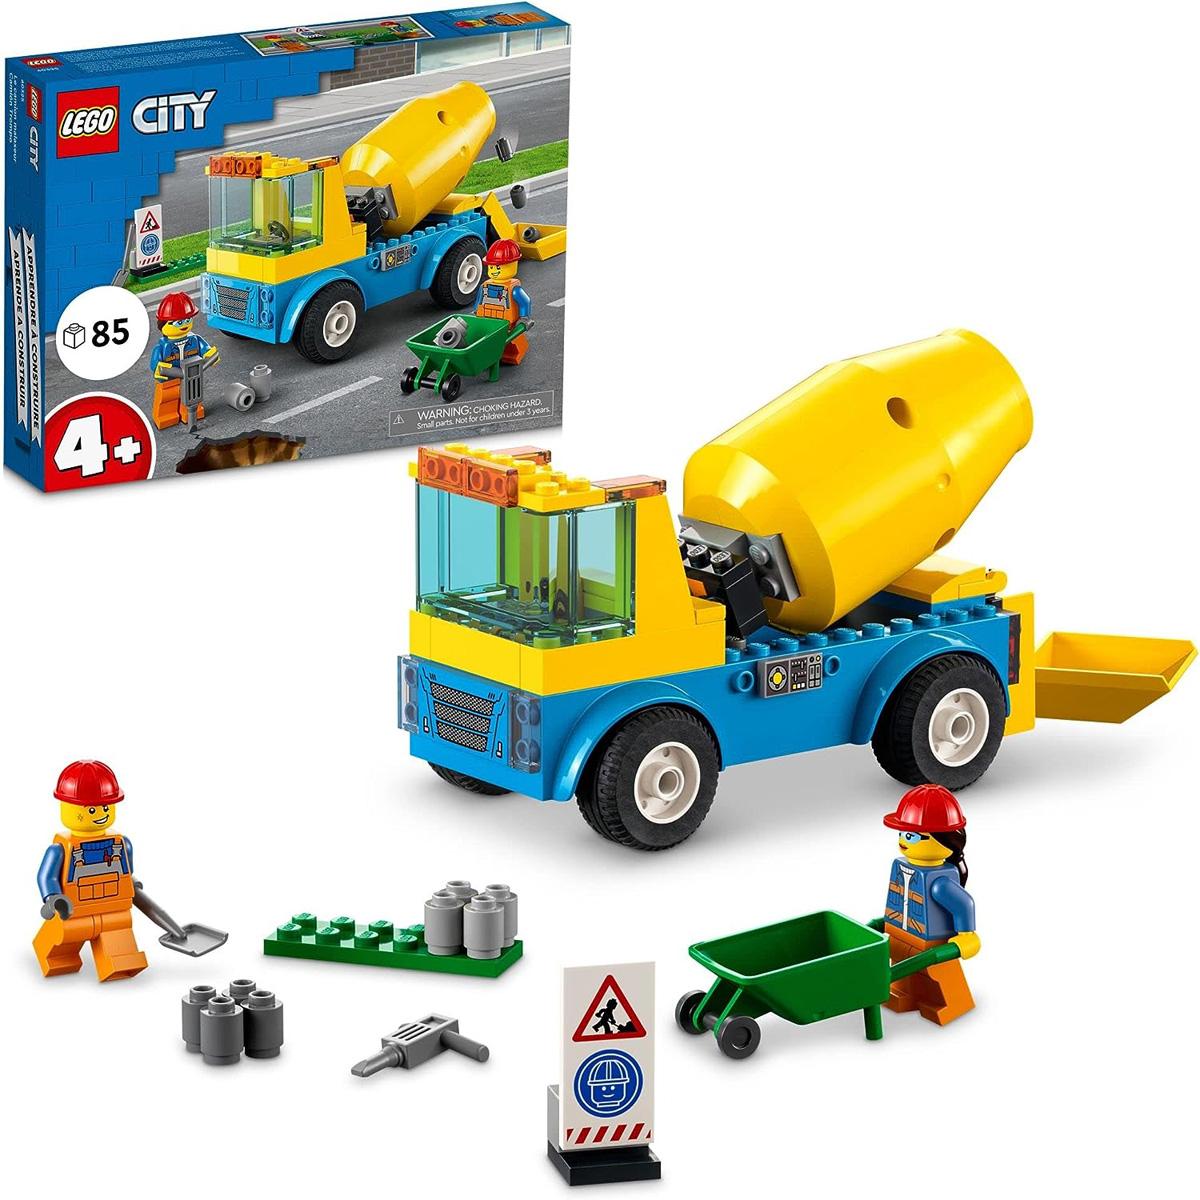 LEGO City Great Vehicles Cement Mixer Truck Building Set for $12.79